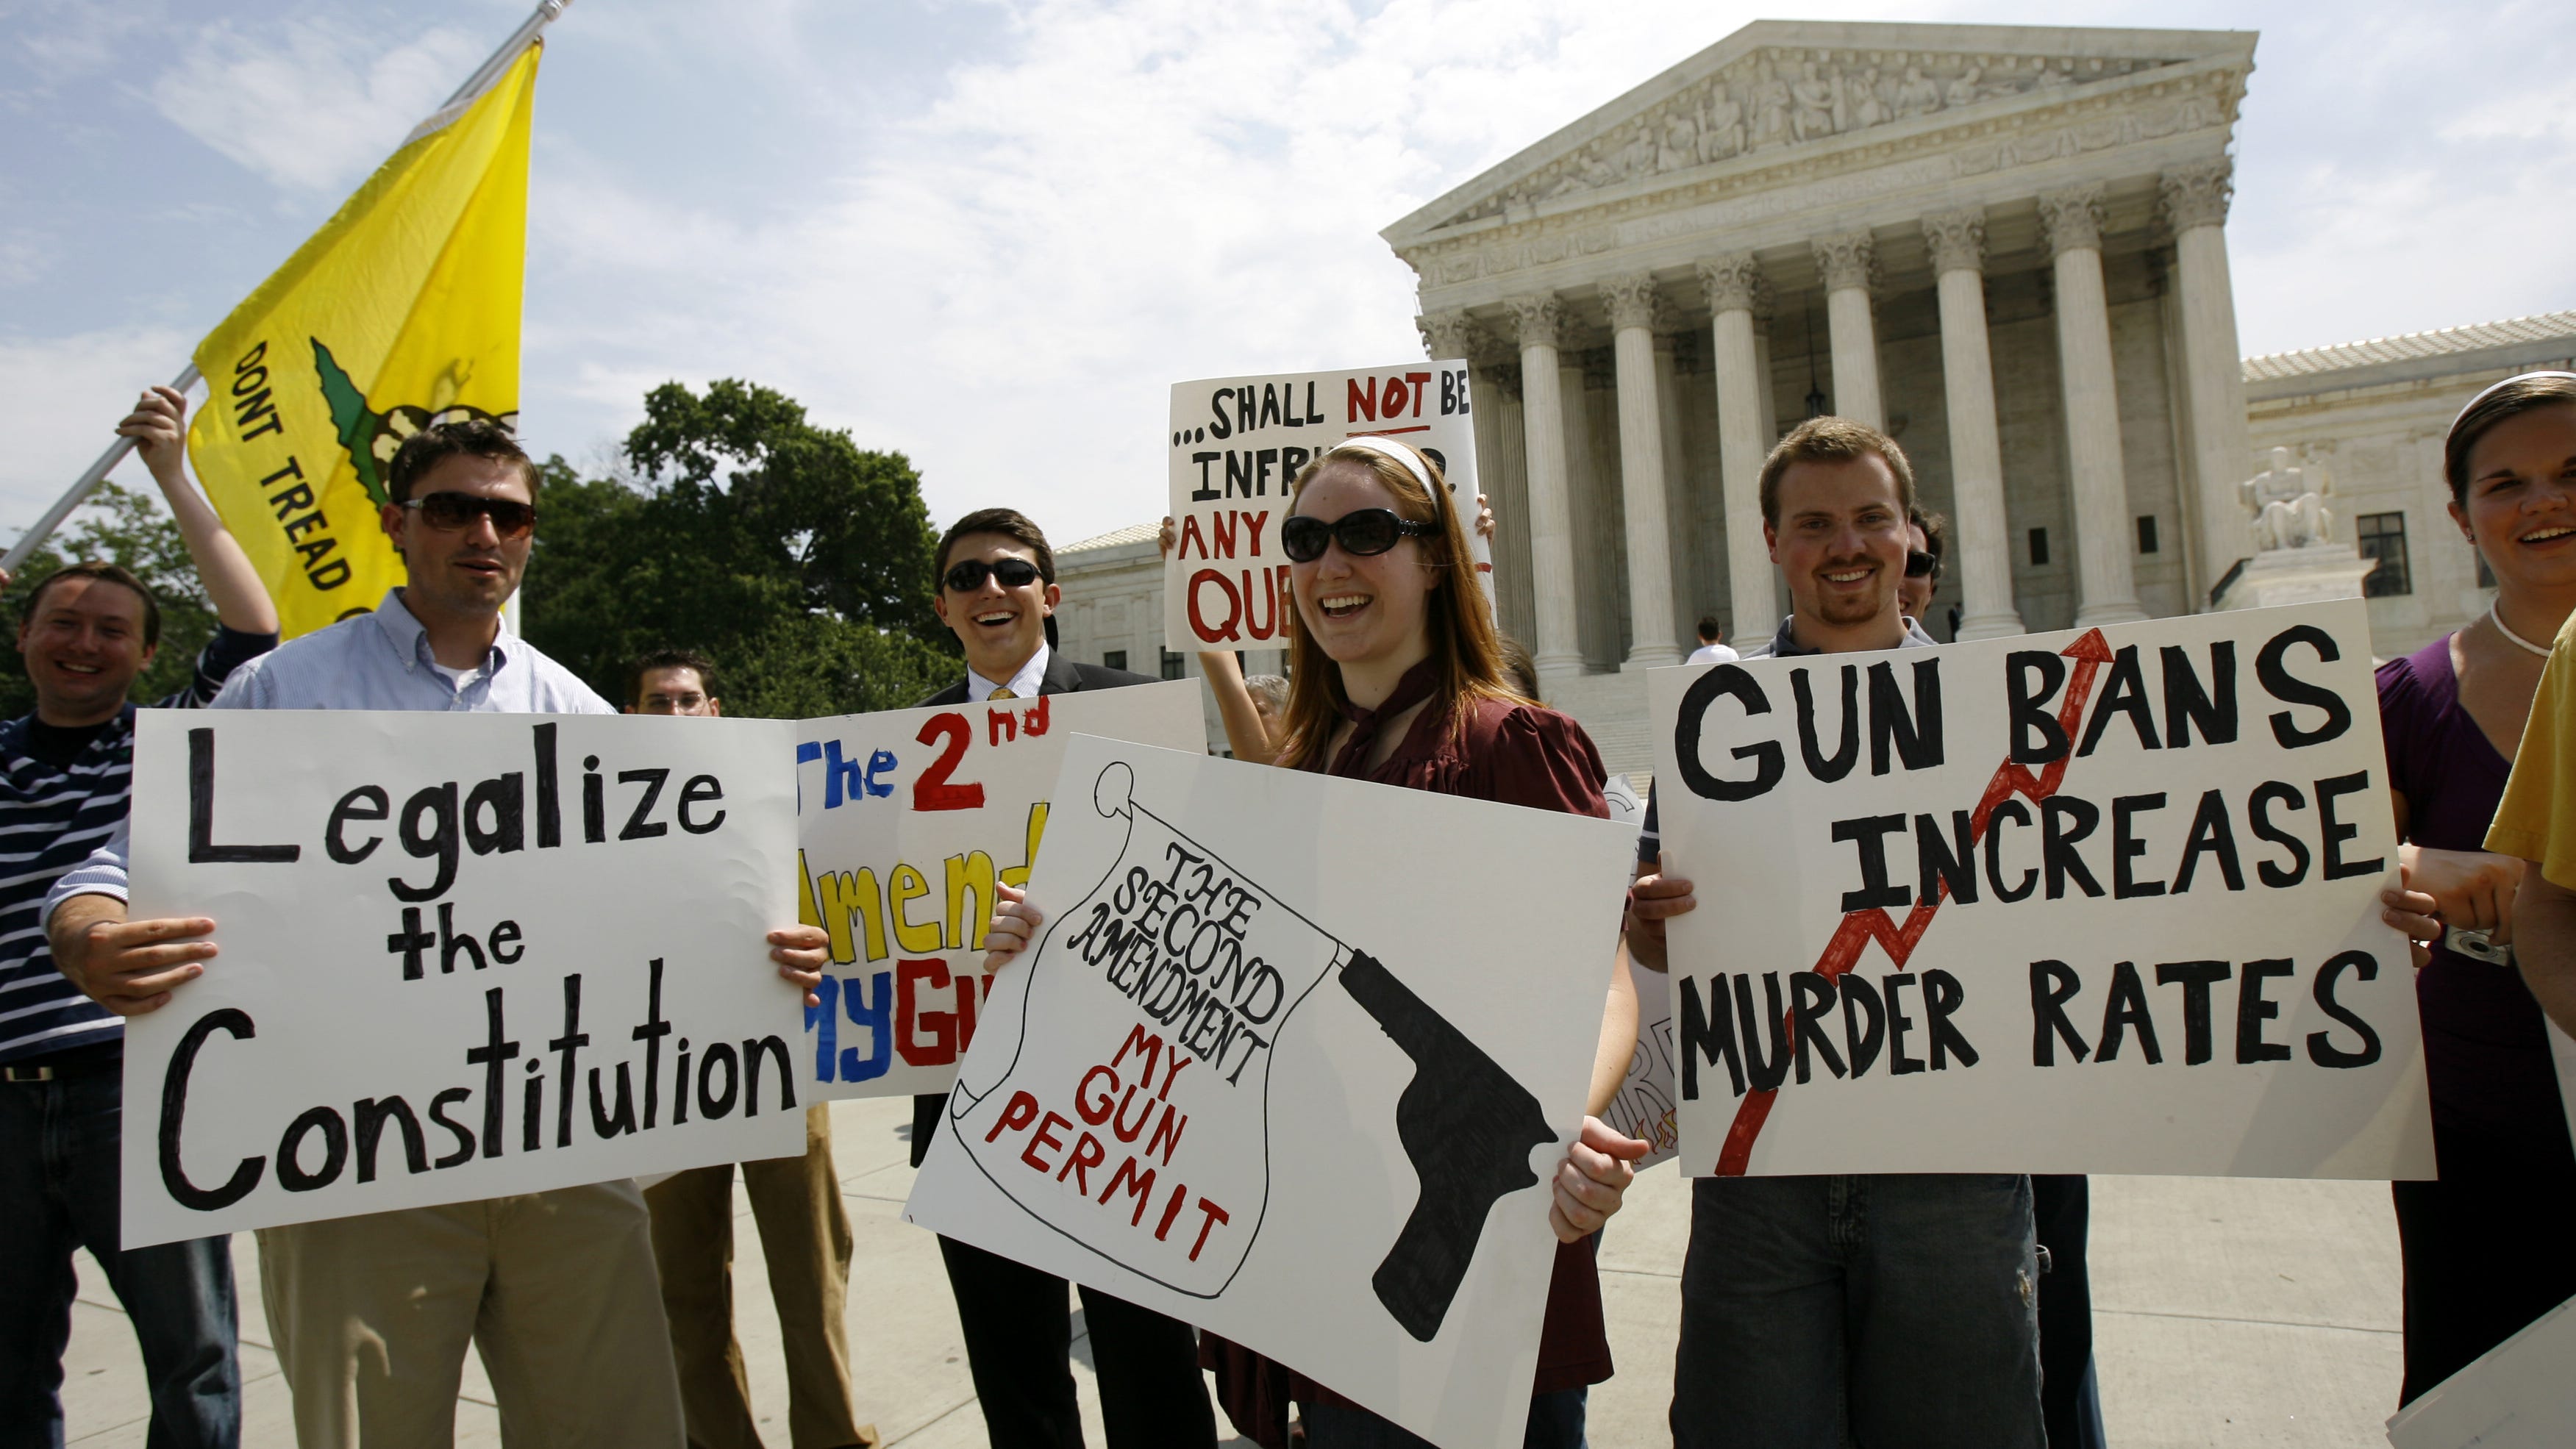 Pro-rights gun supporters hold up their banners outside the Supreme Court in Washington on June 26, 2008, after the court ruled that Americans have a constitutional right to keep guns in their homes for self-defense, the justices' first major pronouncement on gun control in U.S. history.